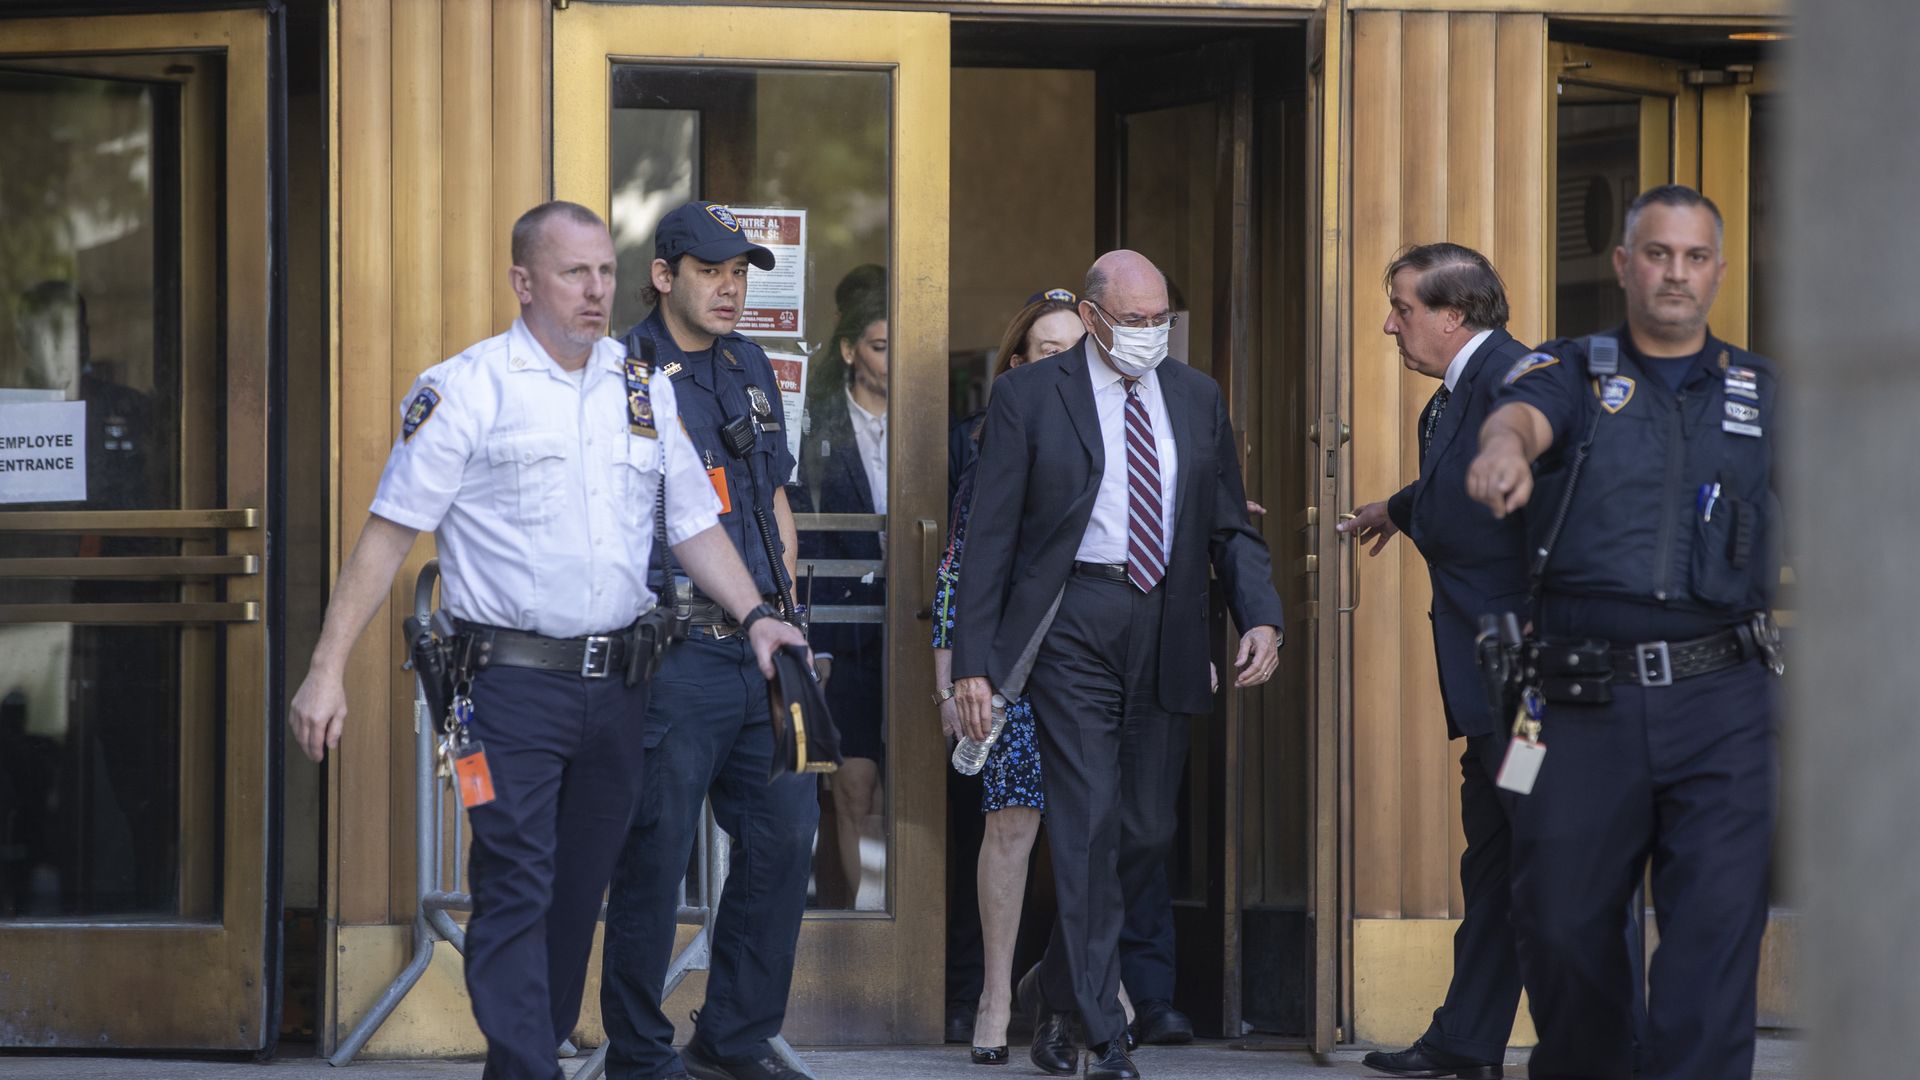 Allen Weisselberg, former chief financial officer of Trump Organization Inc., center, departs from criminal court in New York, US, on Friday, Aug. 12, 2022.